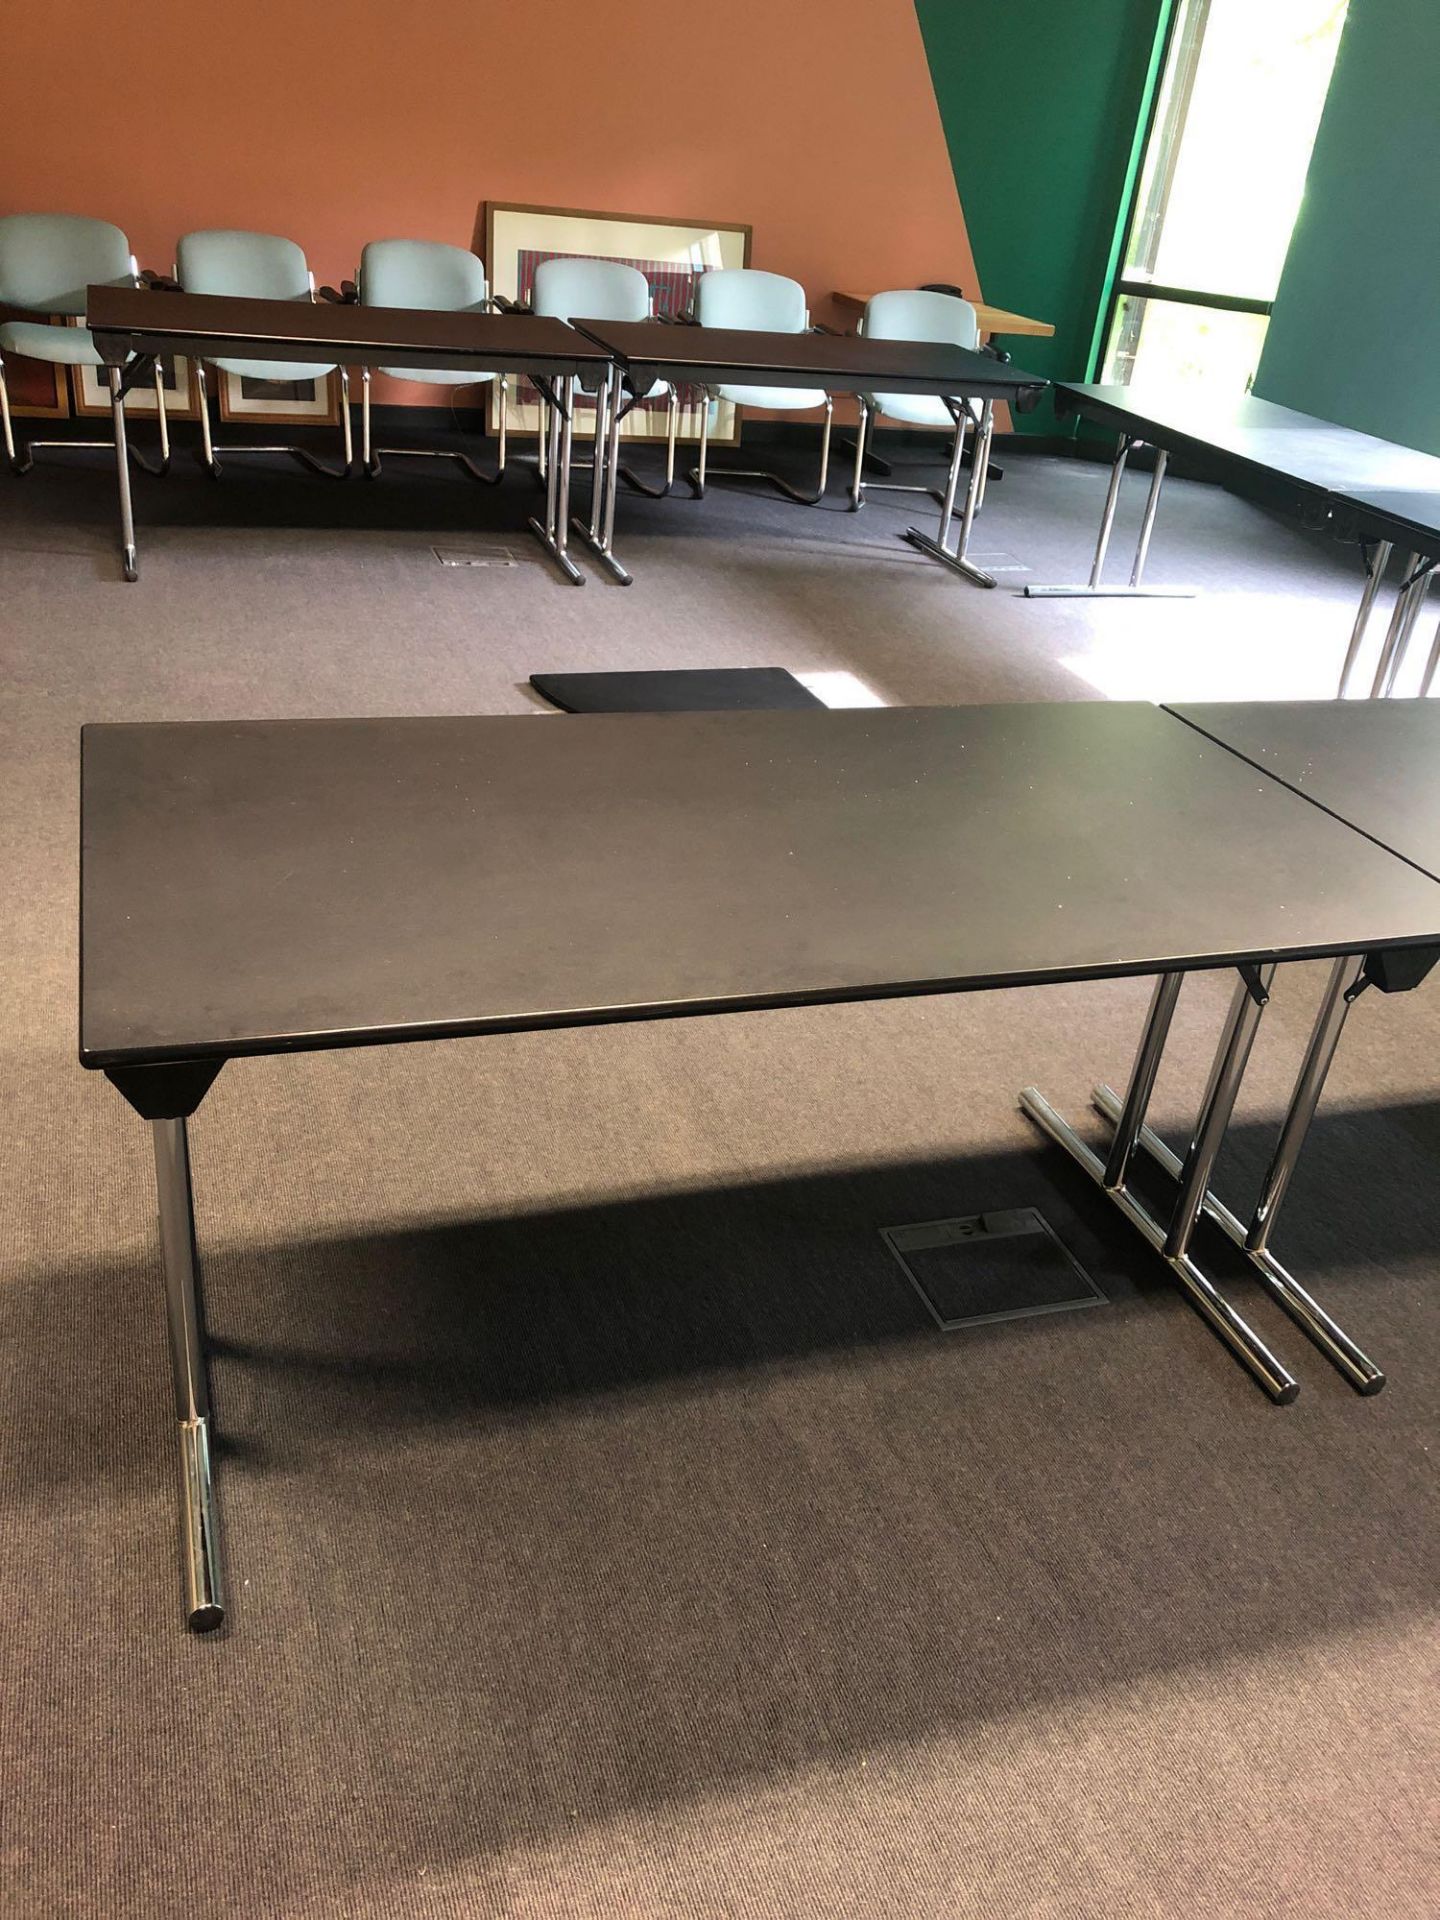 6x Burgess Furnitures Black And Chrome Conference Tables 1500 x 750 Mm - Image 2 of 2